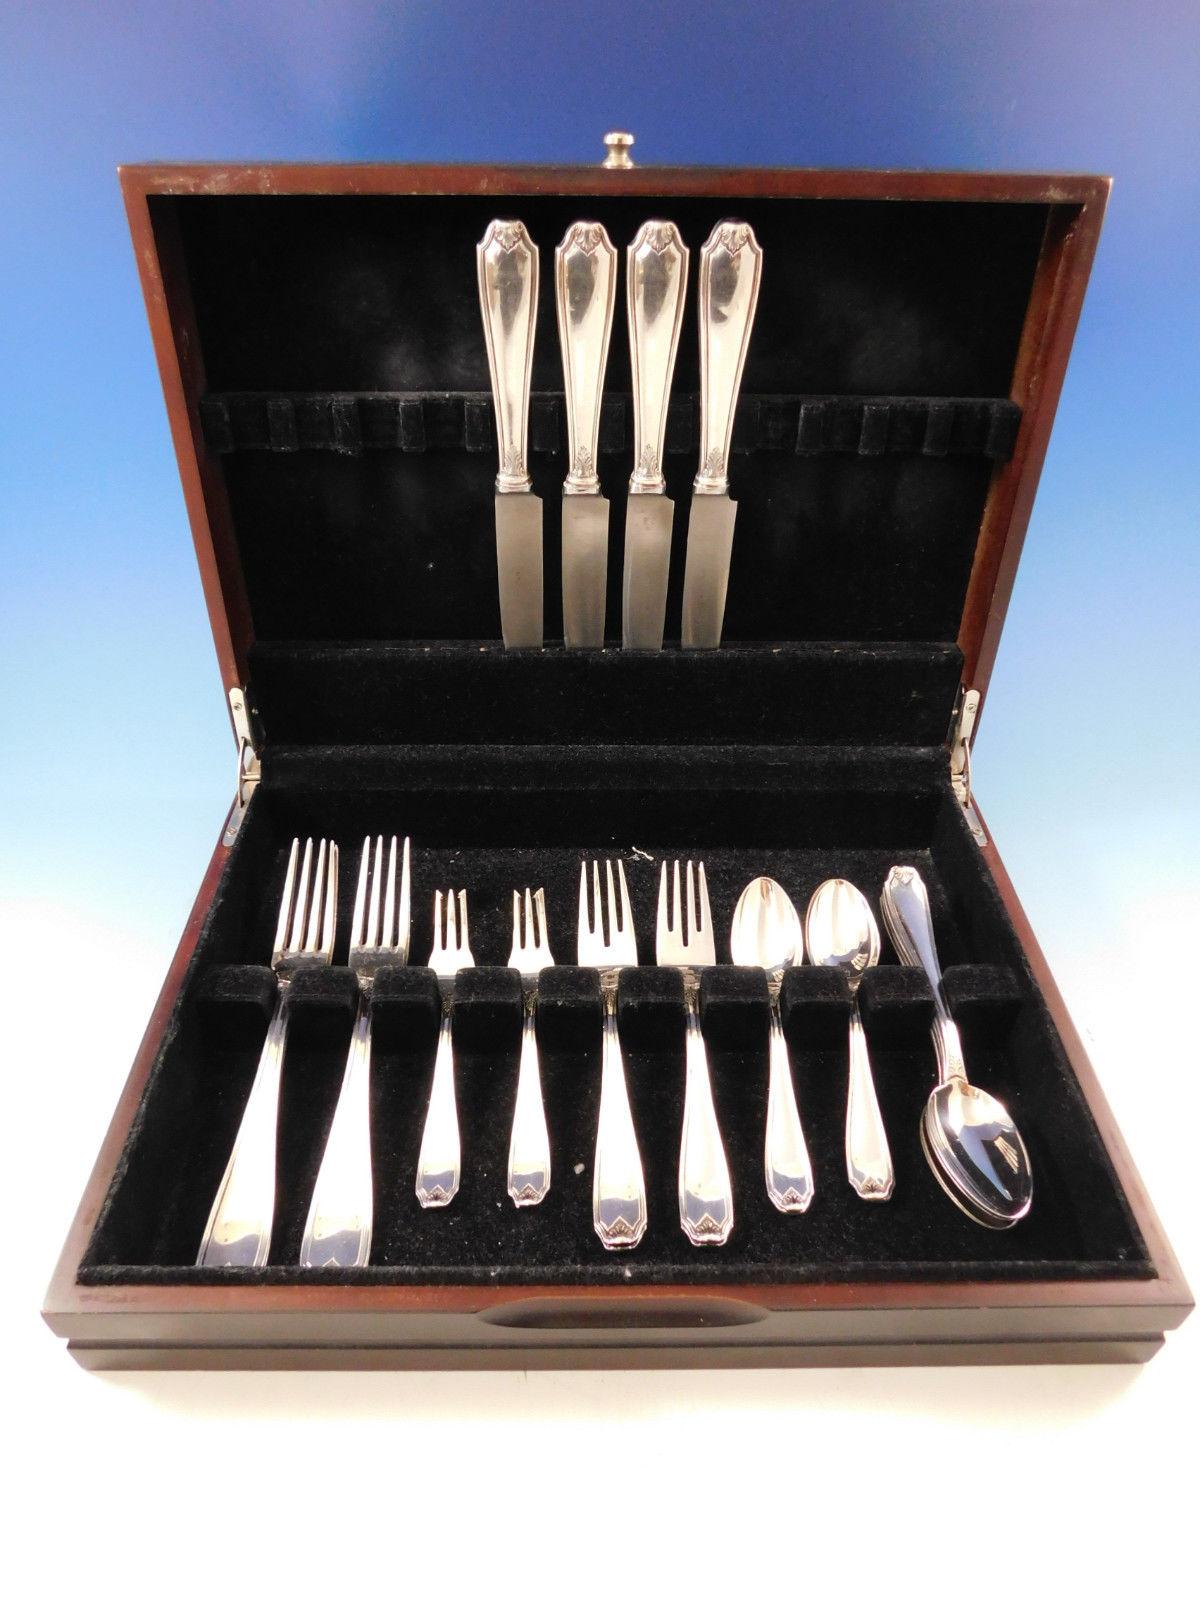 Rare Dinner size Piedmont by Buccellati Italy Silverplated Flatware set, 24 pieces. This set includes:

4 Dinner Size Knives, 9 7/8